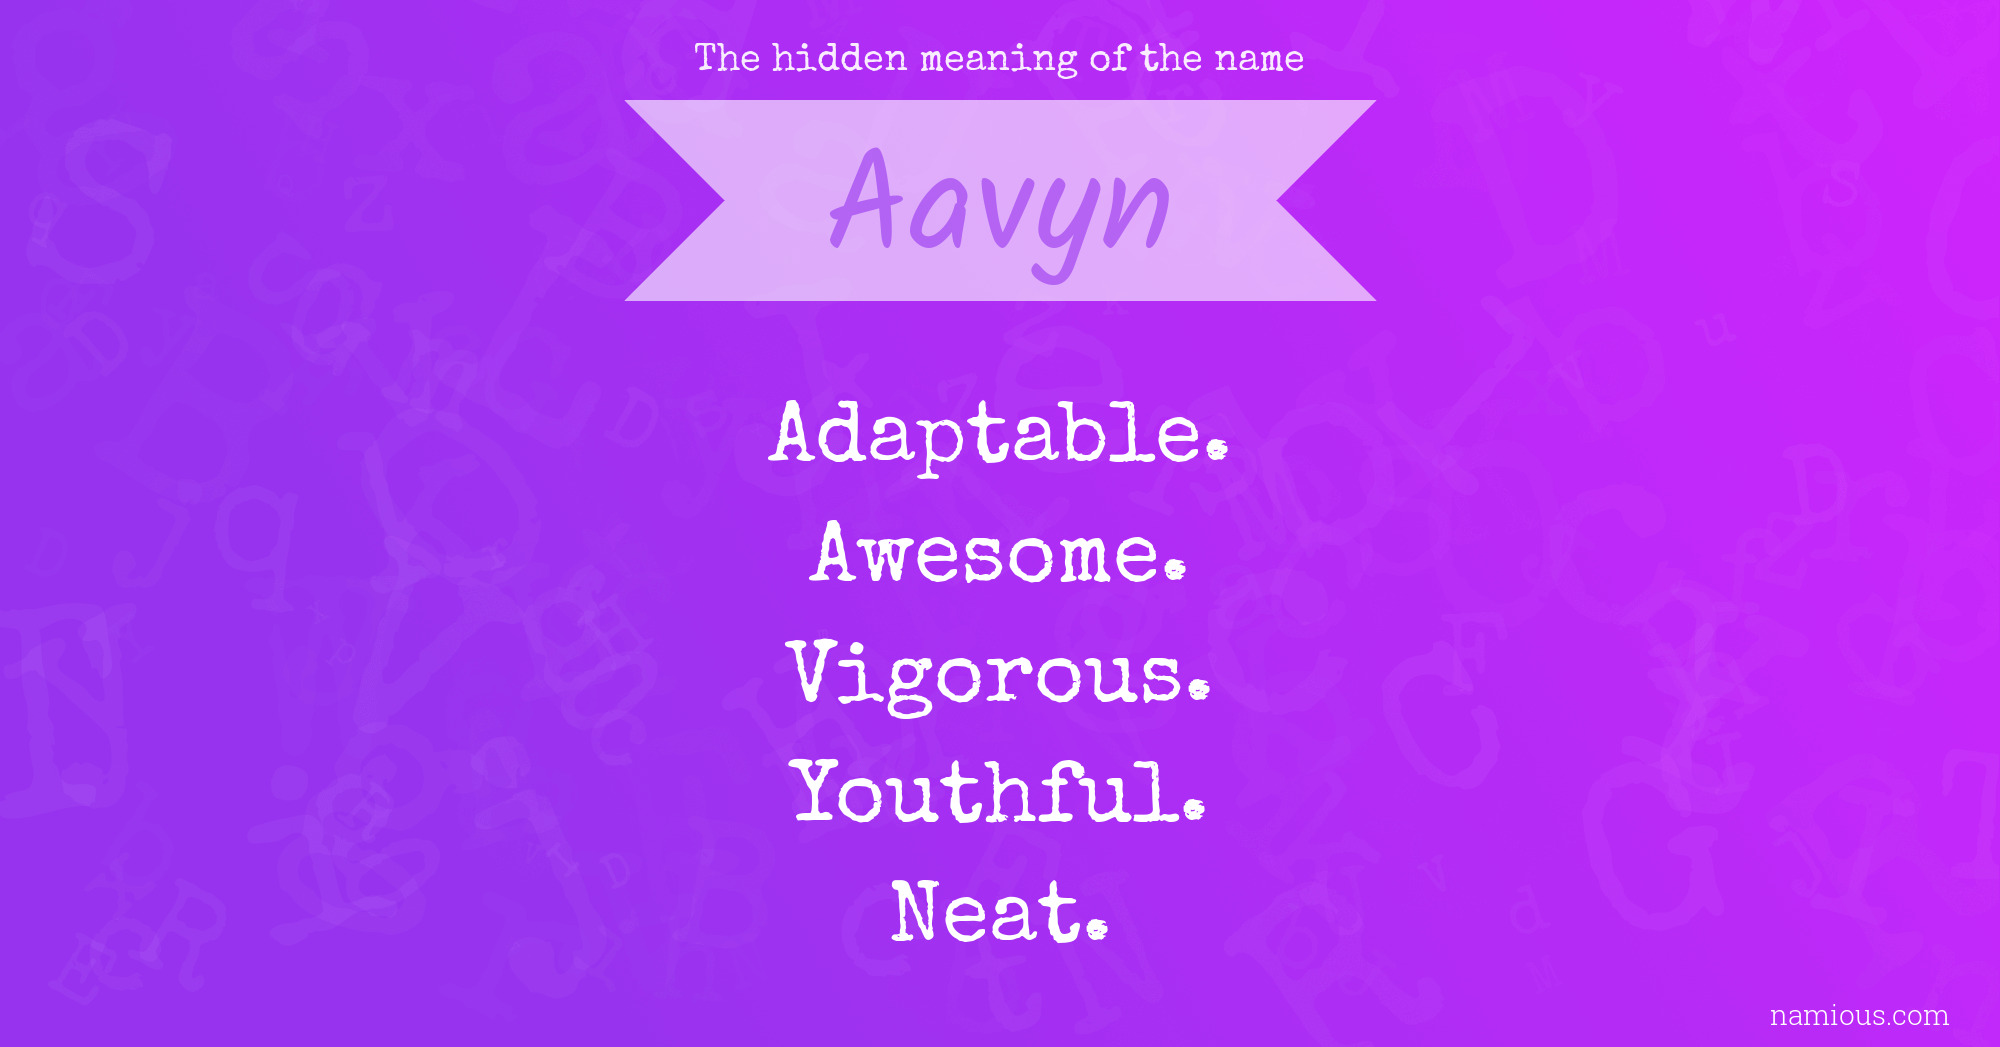 The hidden meaning of the name Aavyn